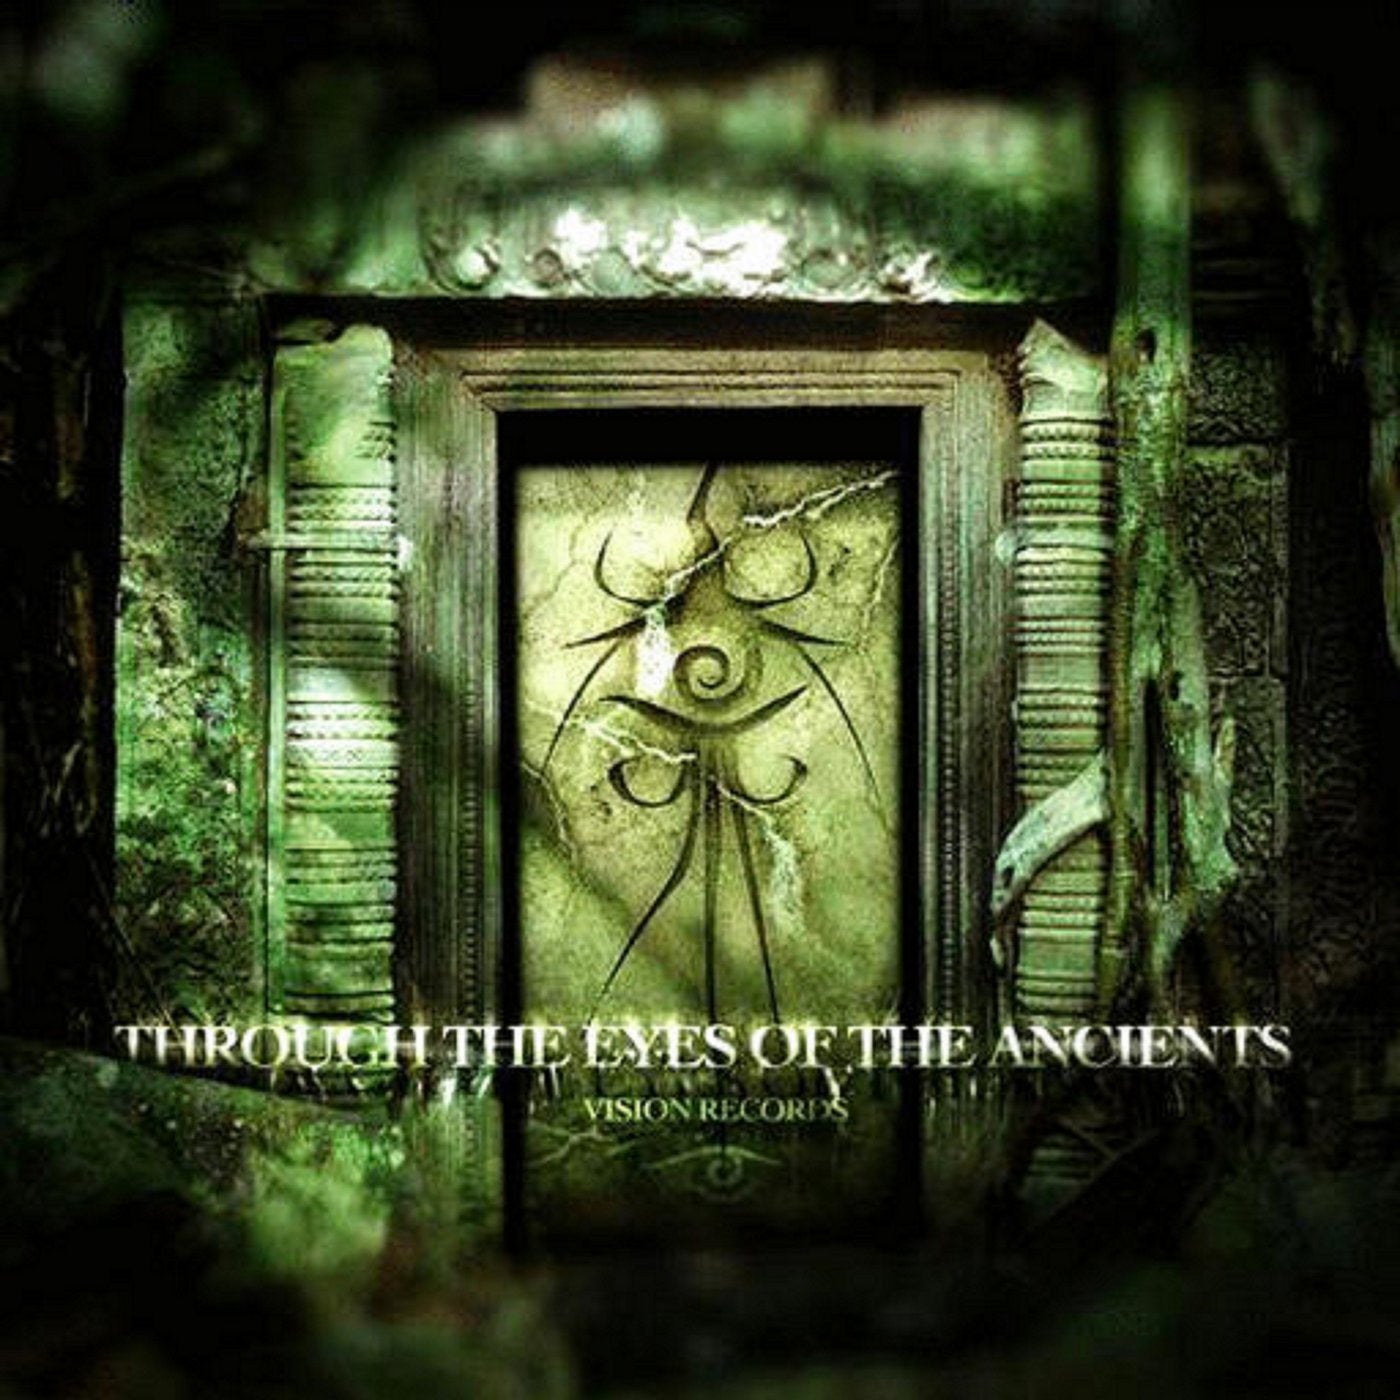 Through the Eyes of the Ancients